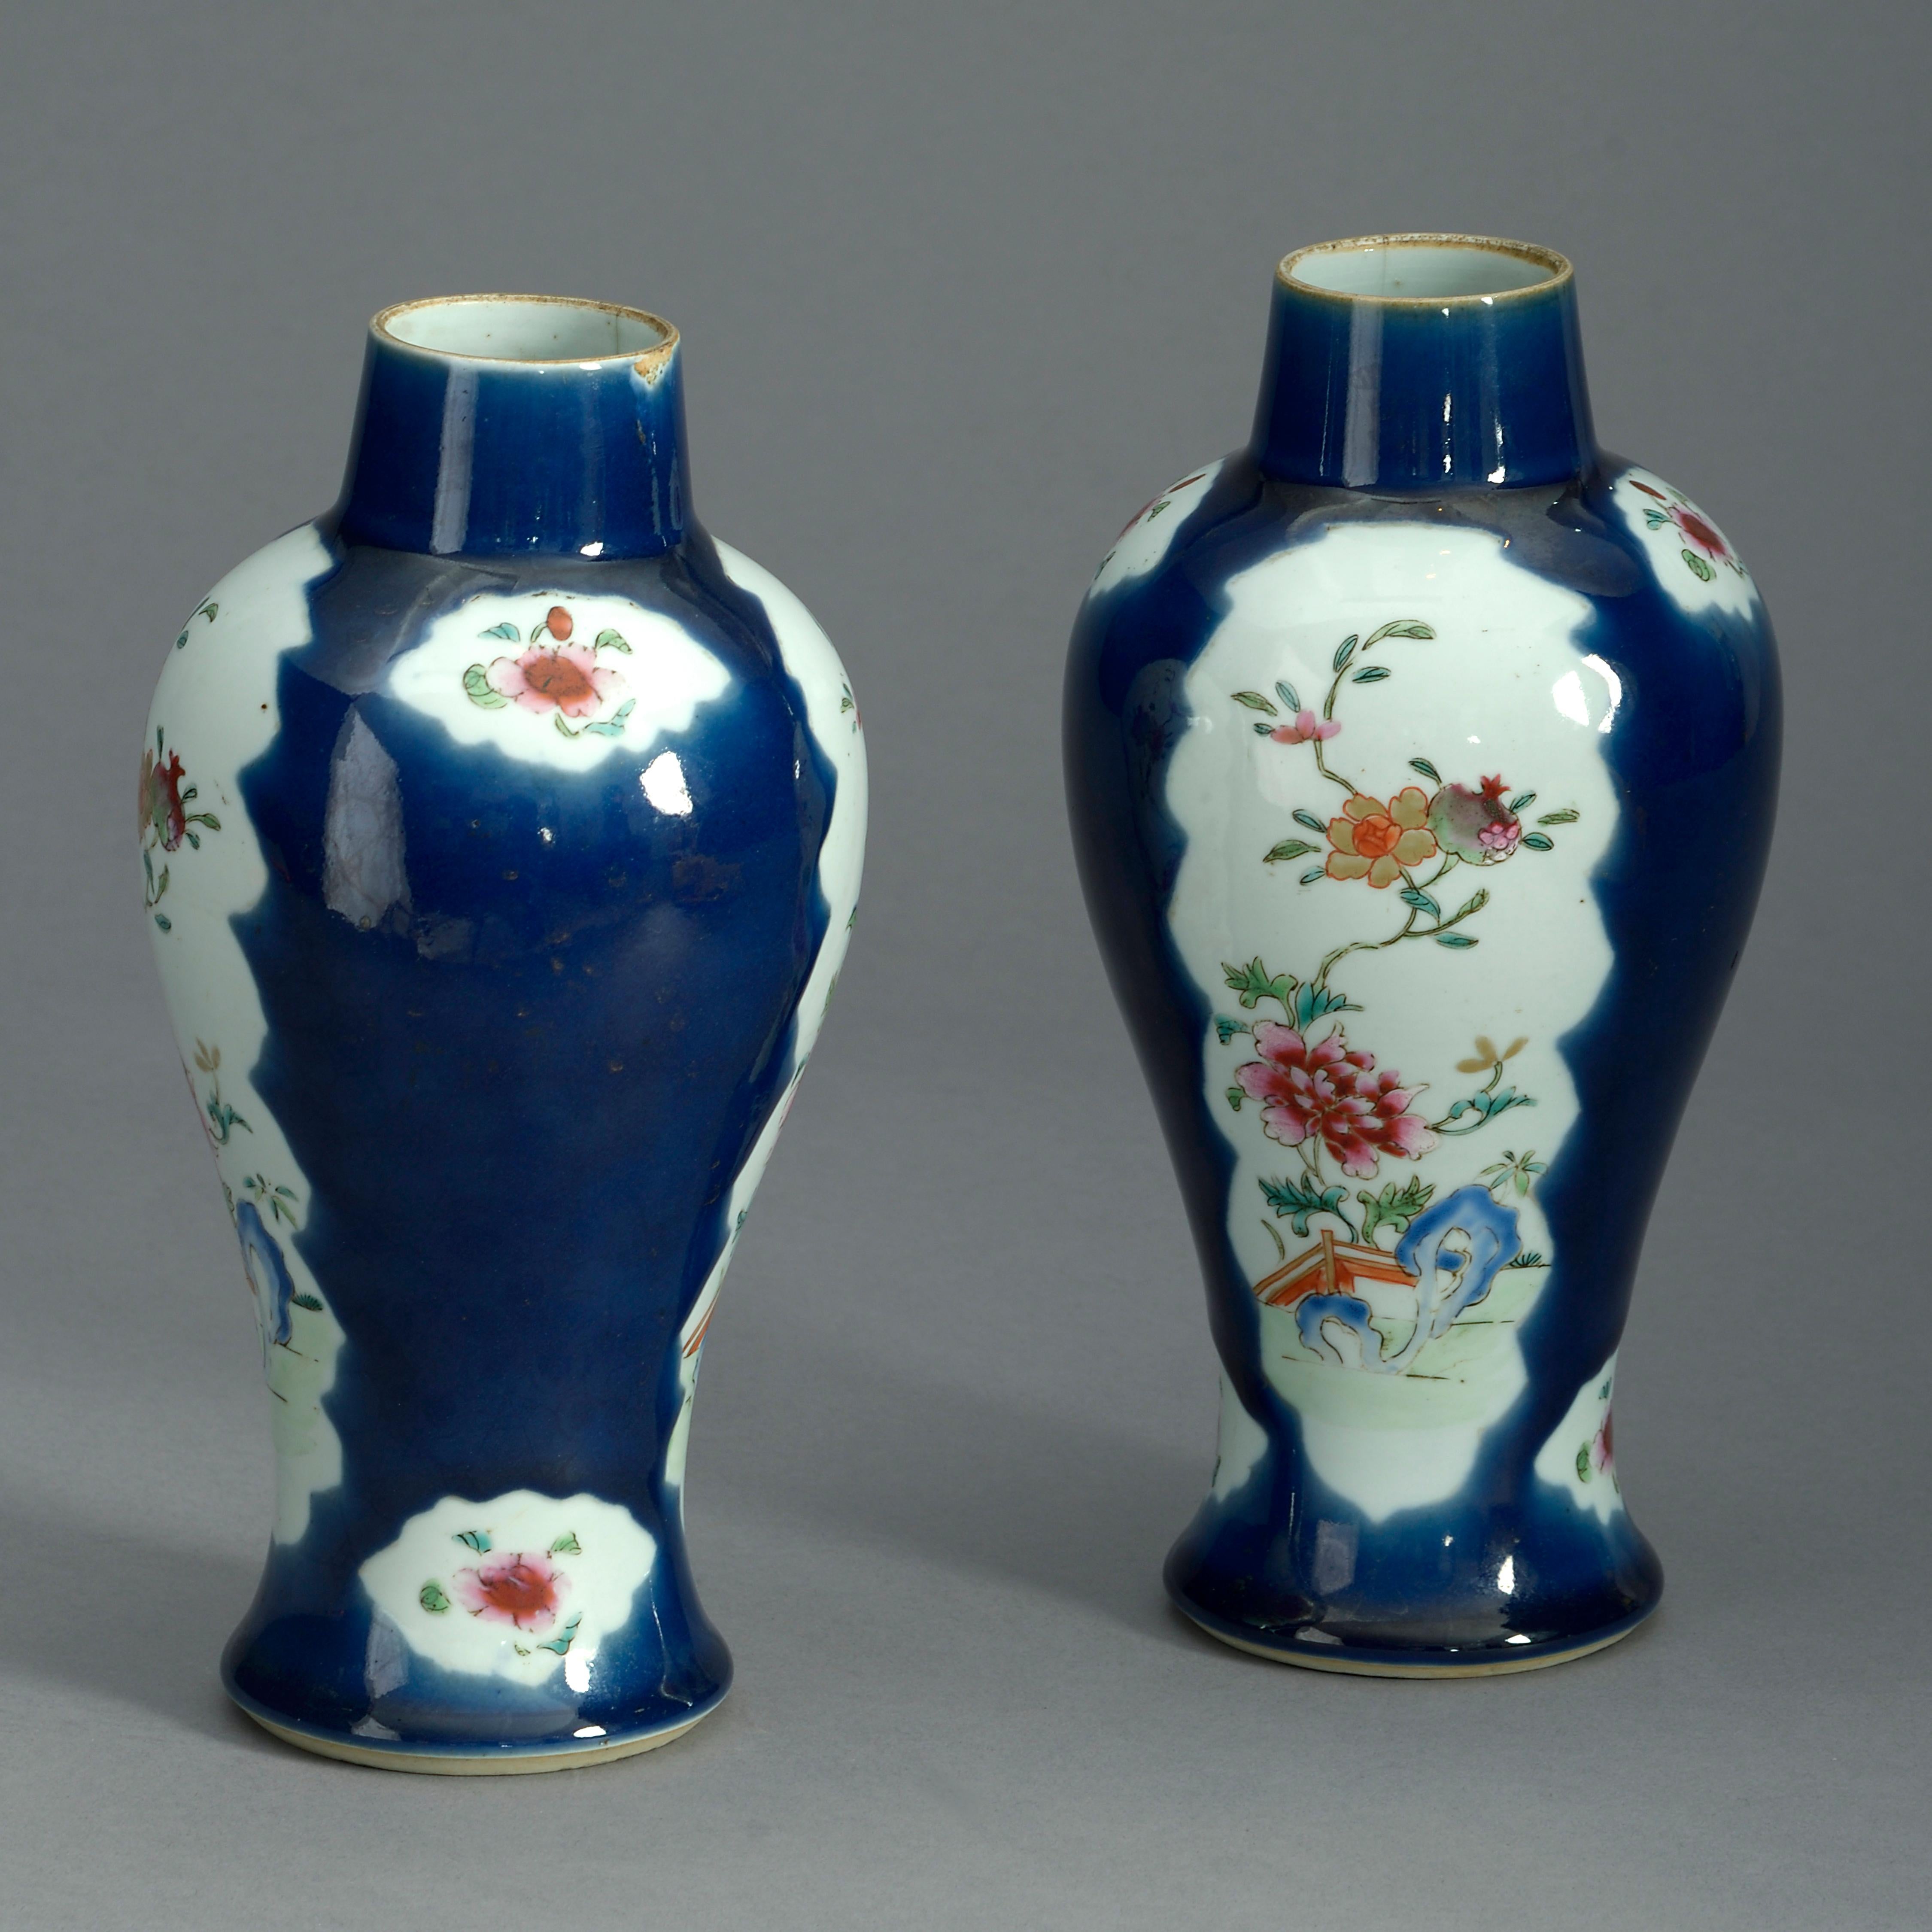 Chinese Export Pair of 18th Century Famille Rose Porcelain Vases